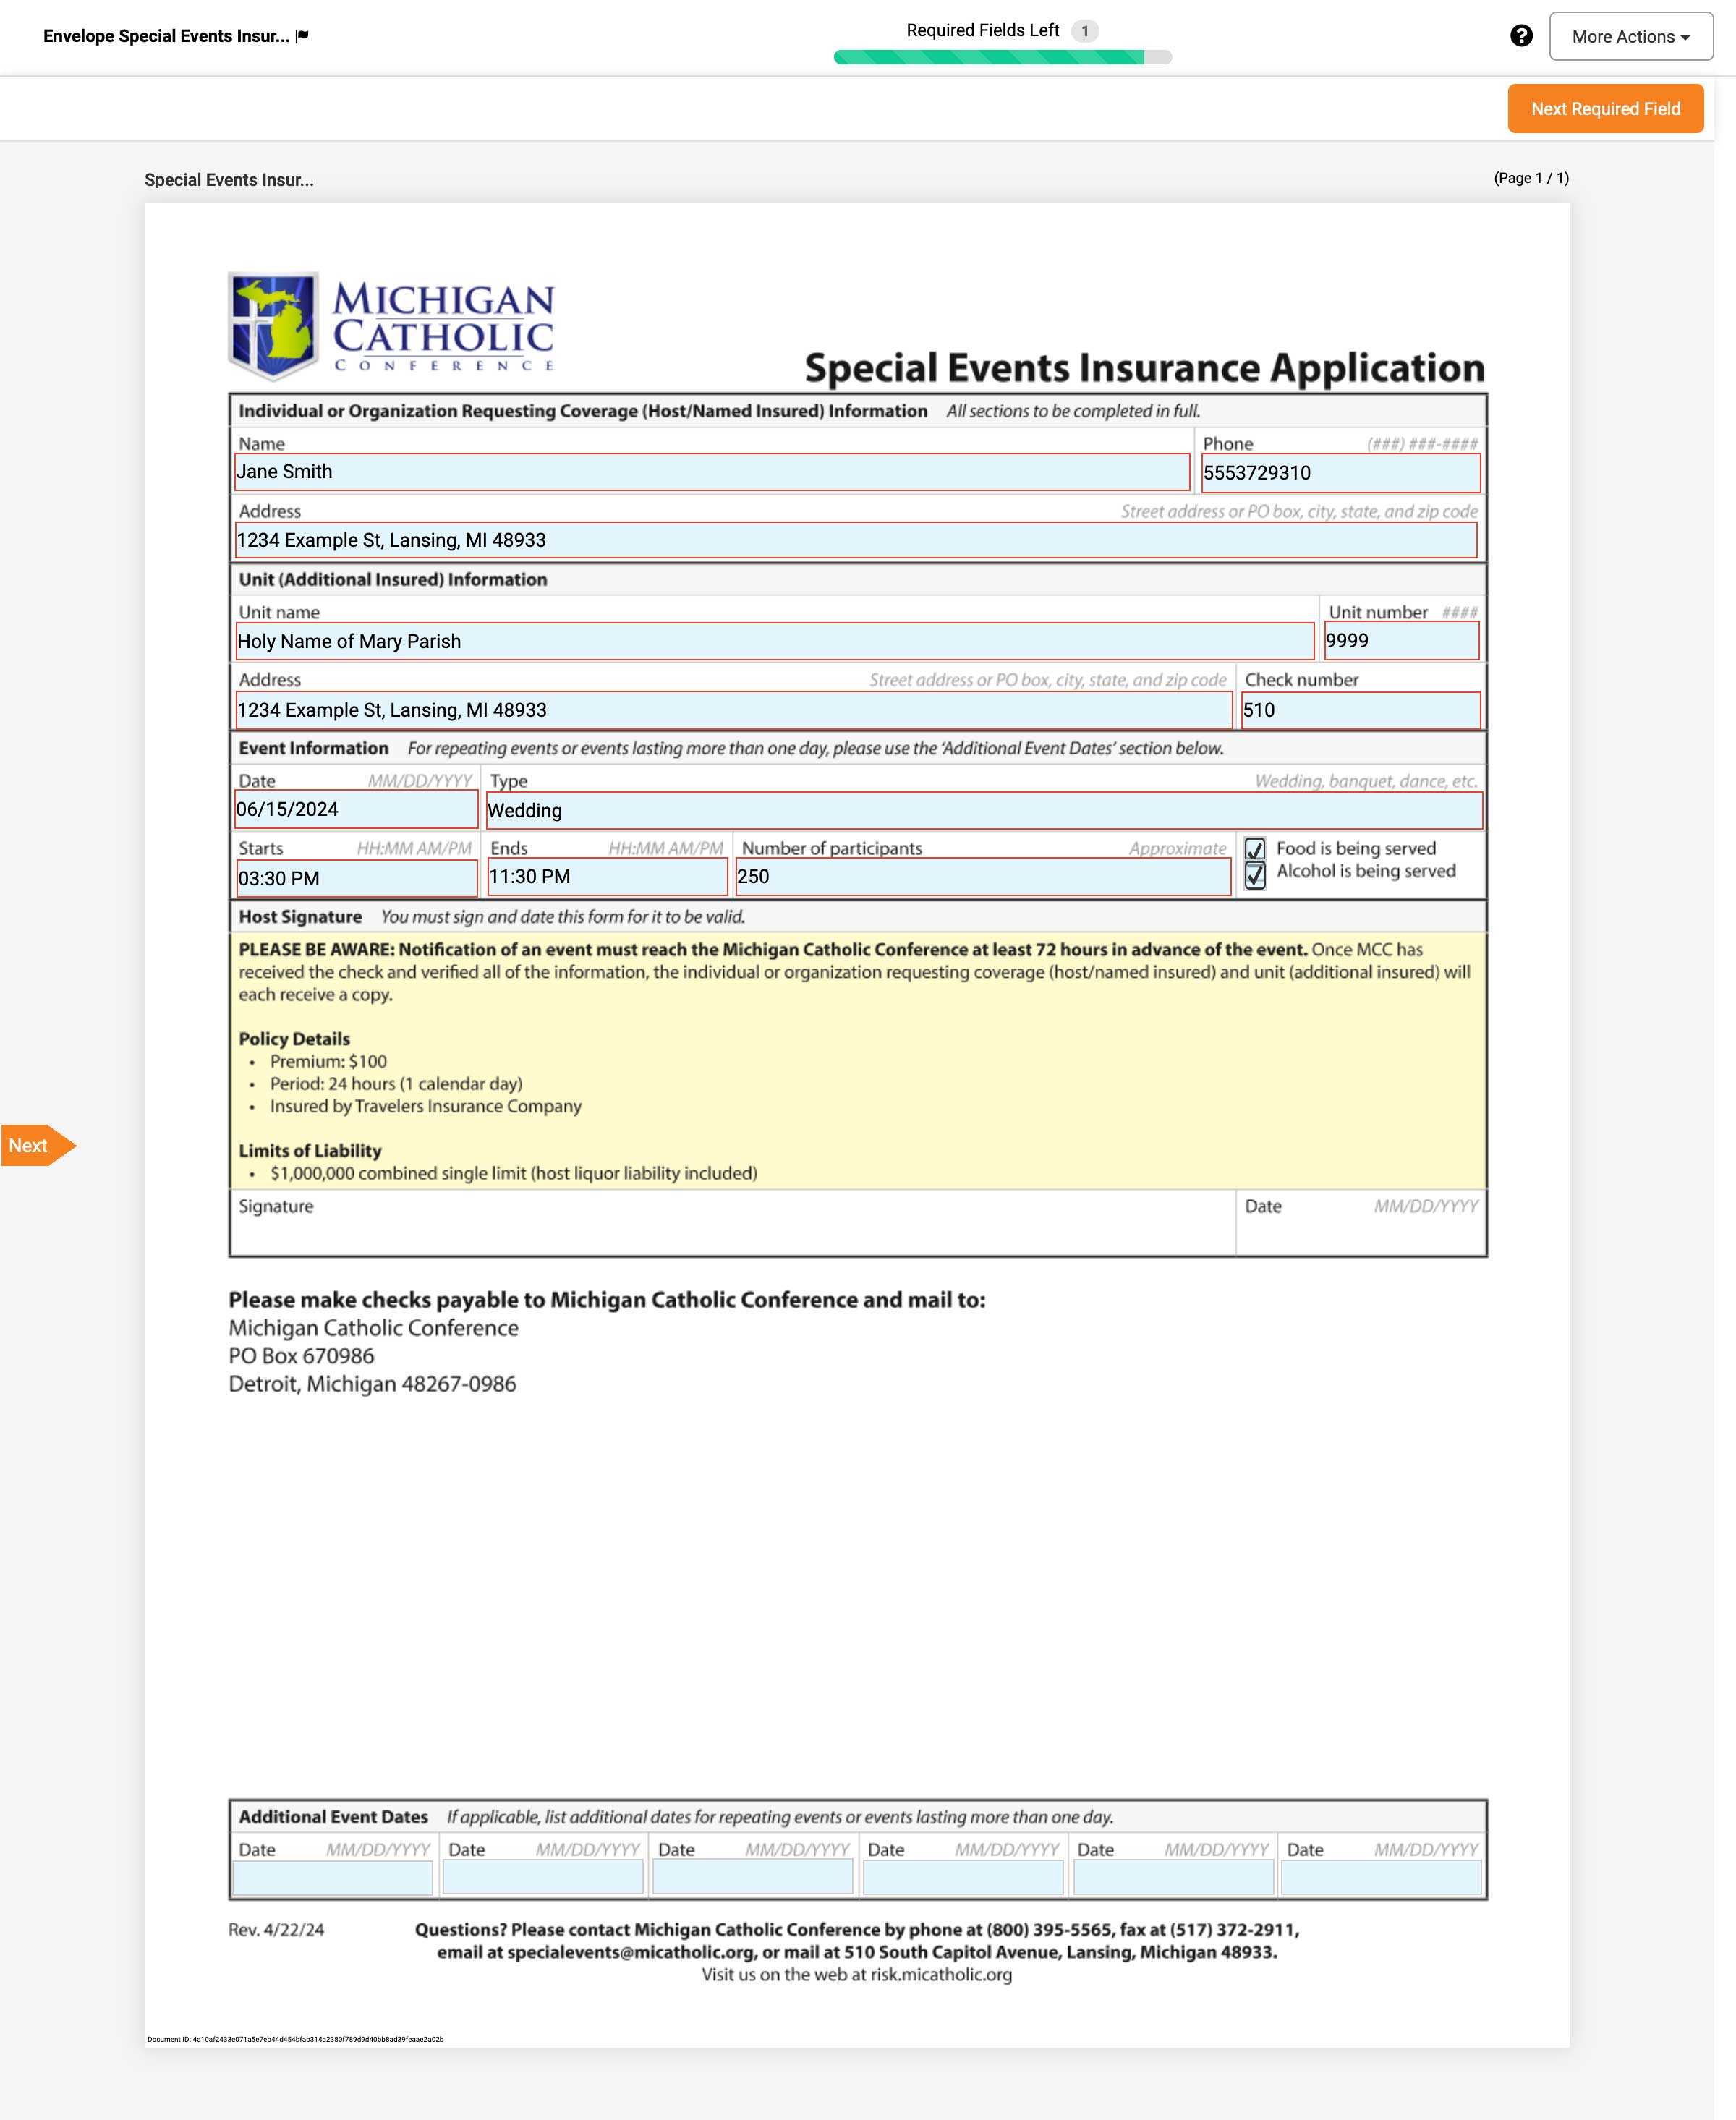 An example completed Special Events Insurance Application